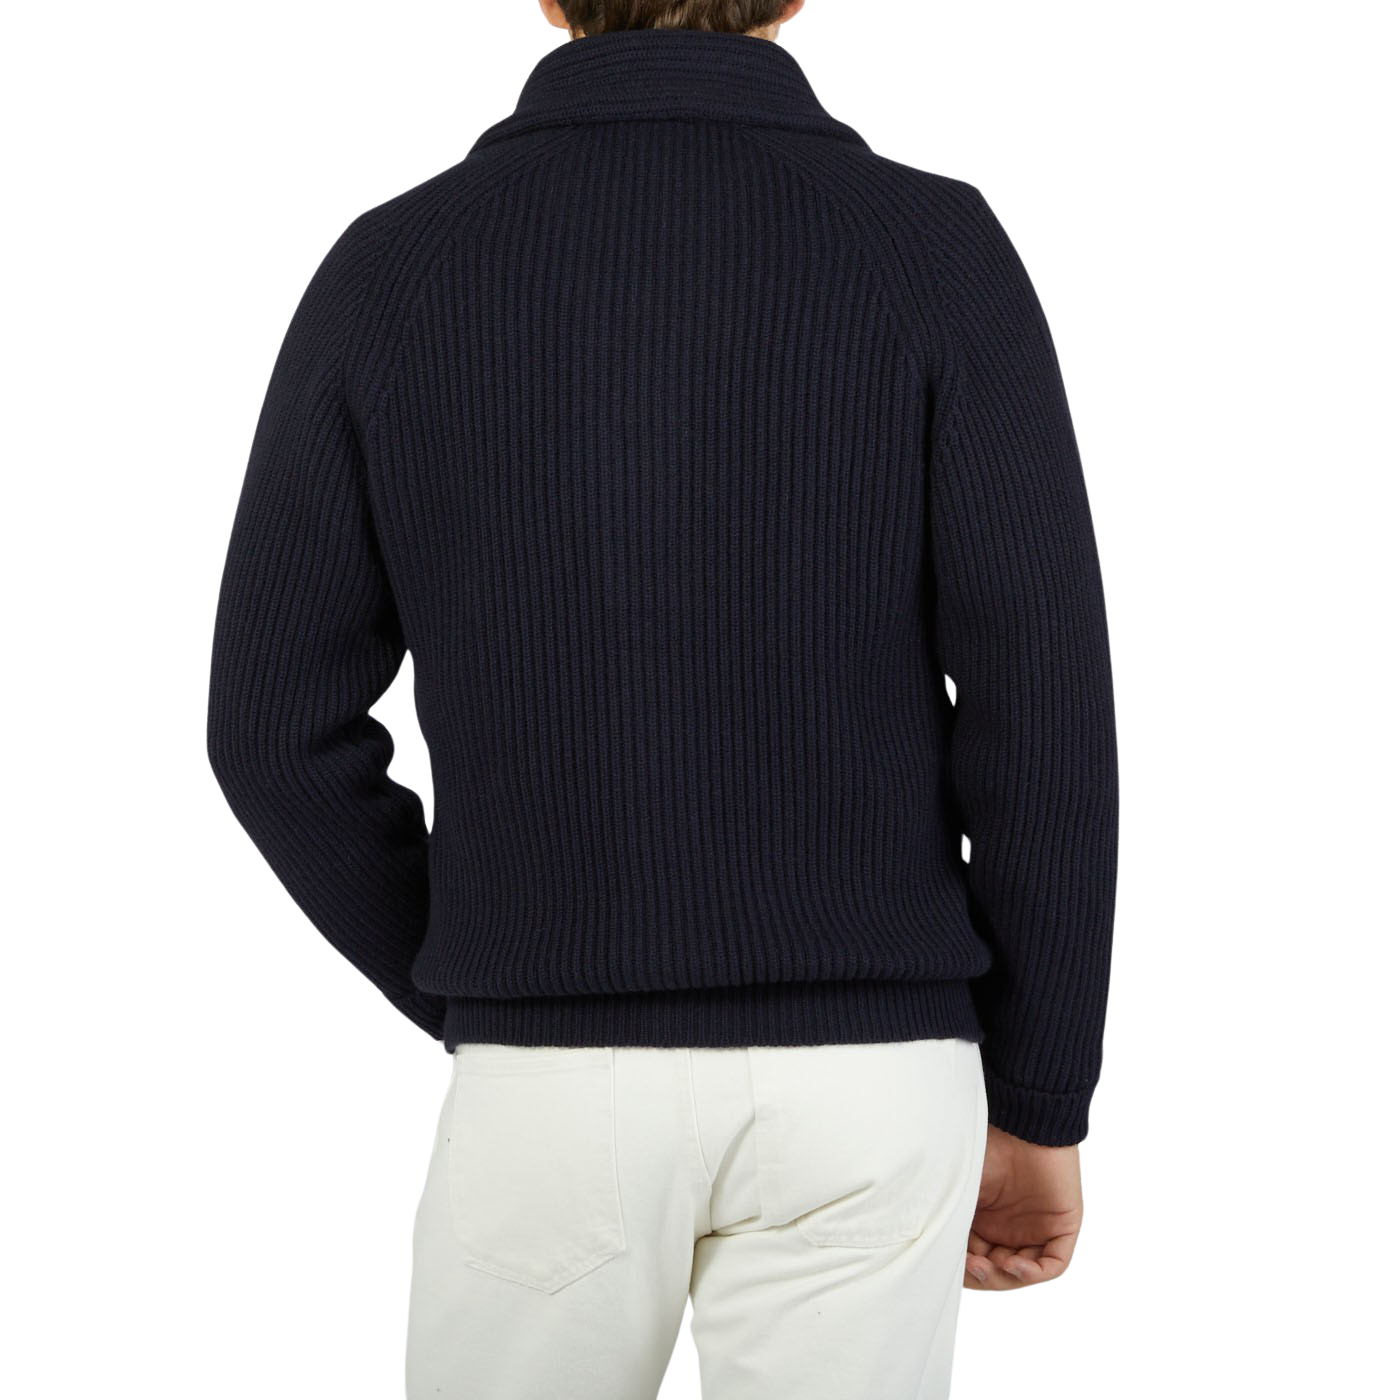 The back view of a man wearing a William Lockie Navy Blue Cashmere Shawl Collar Cardigan.